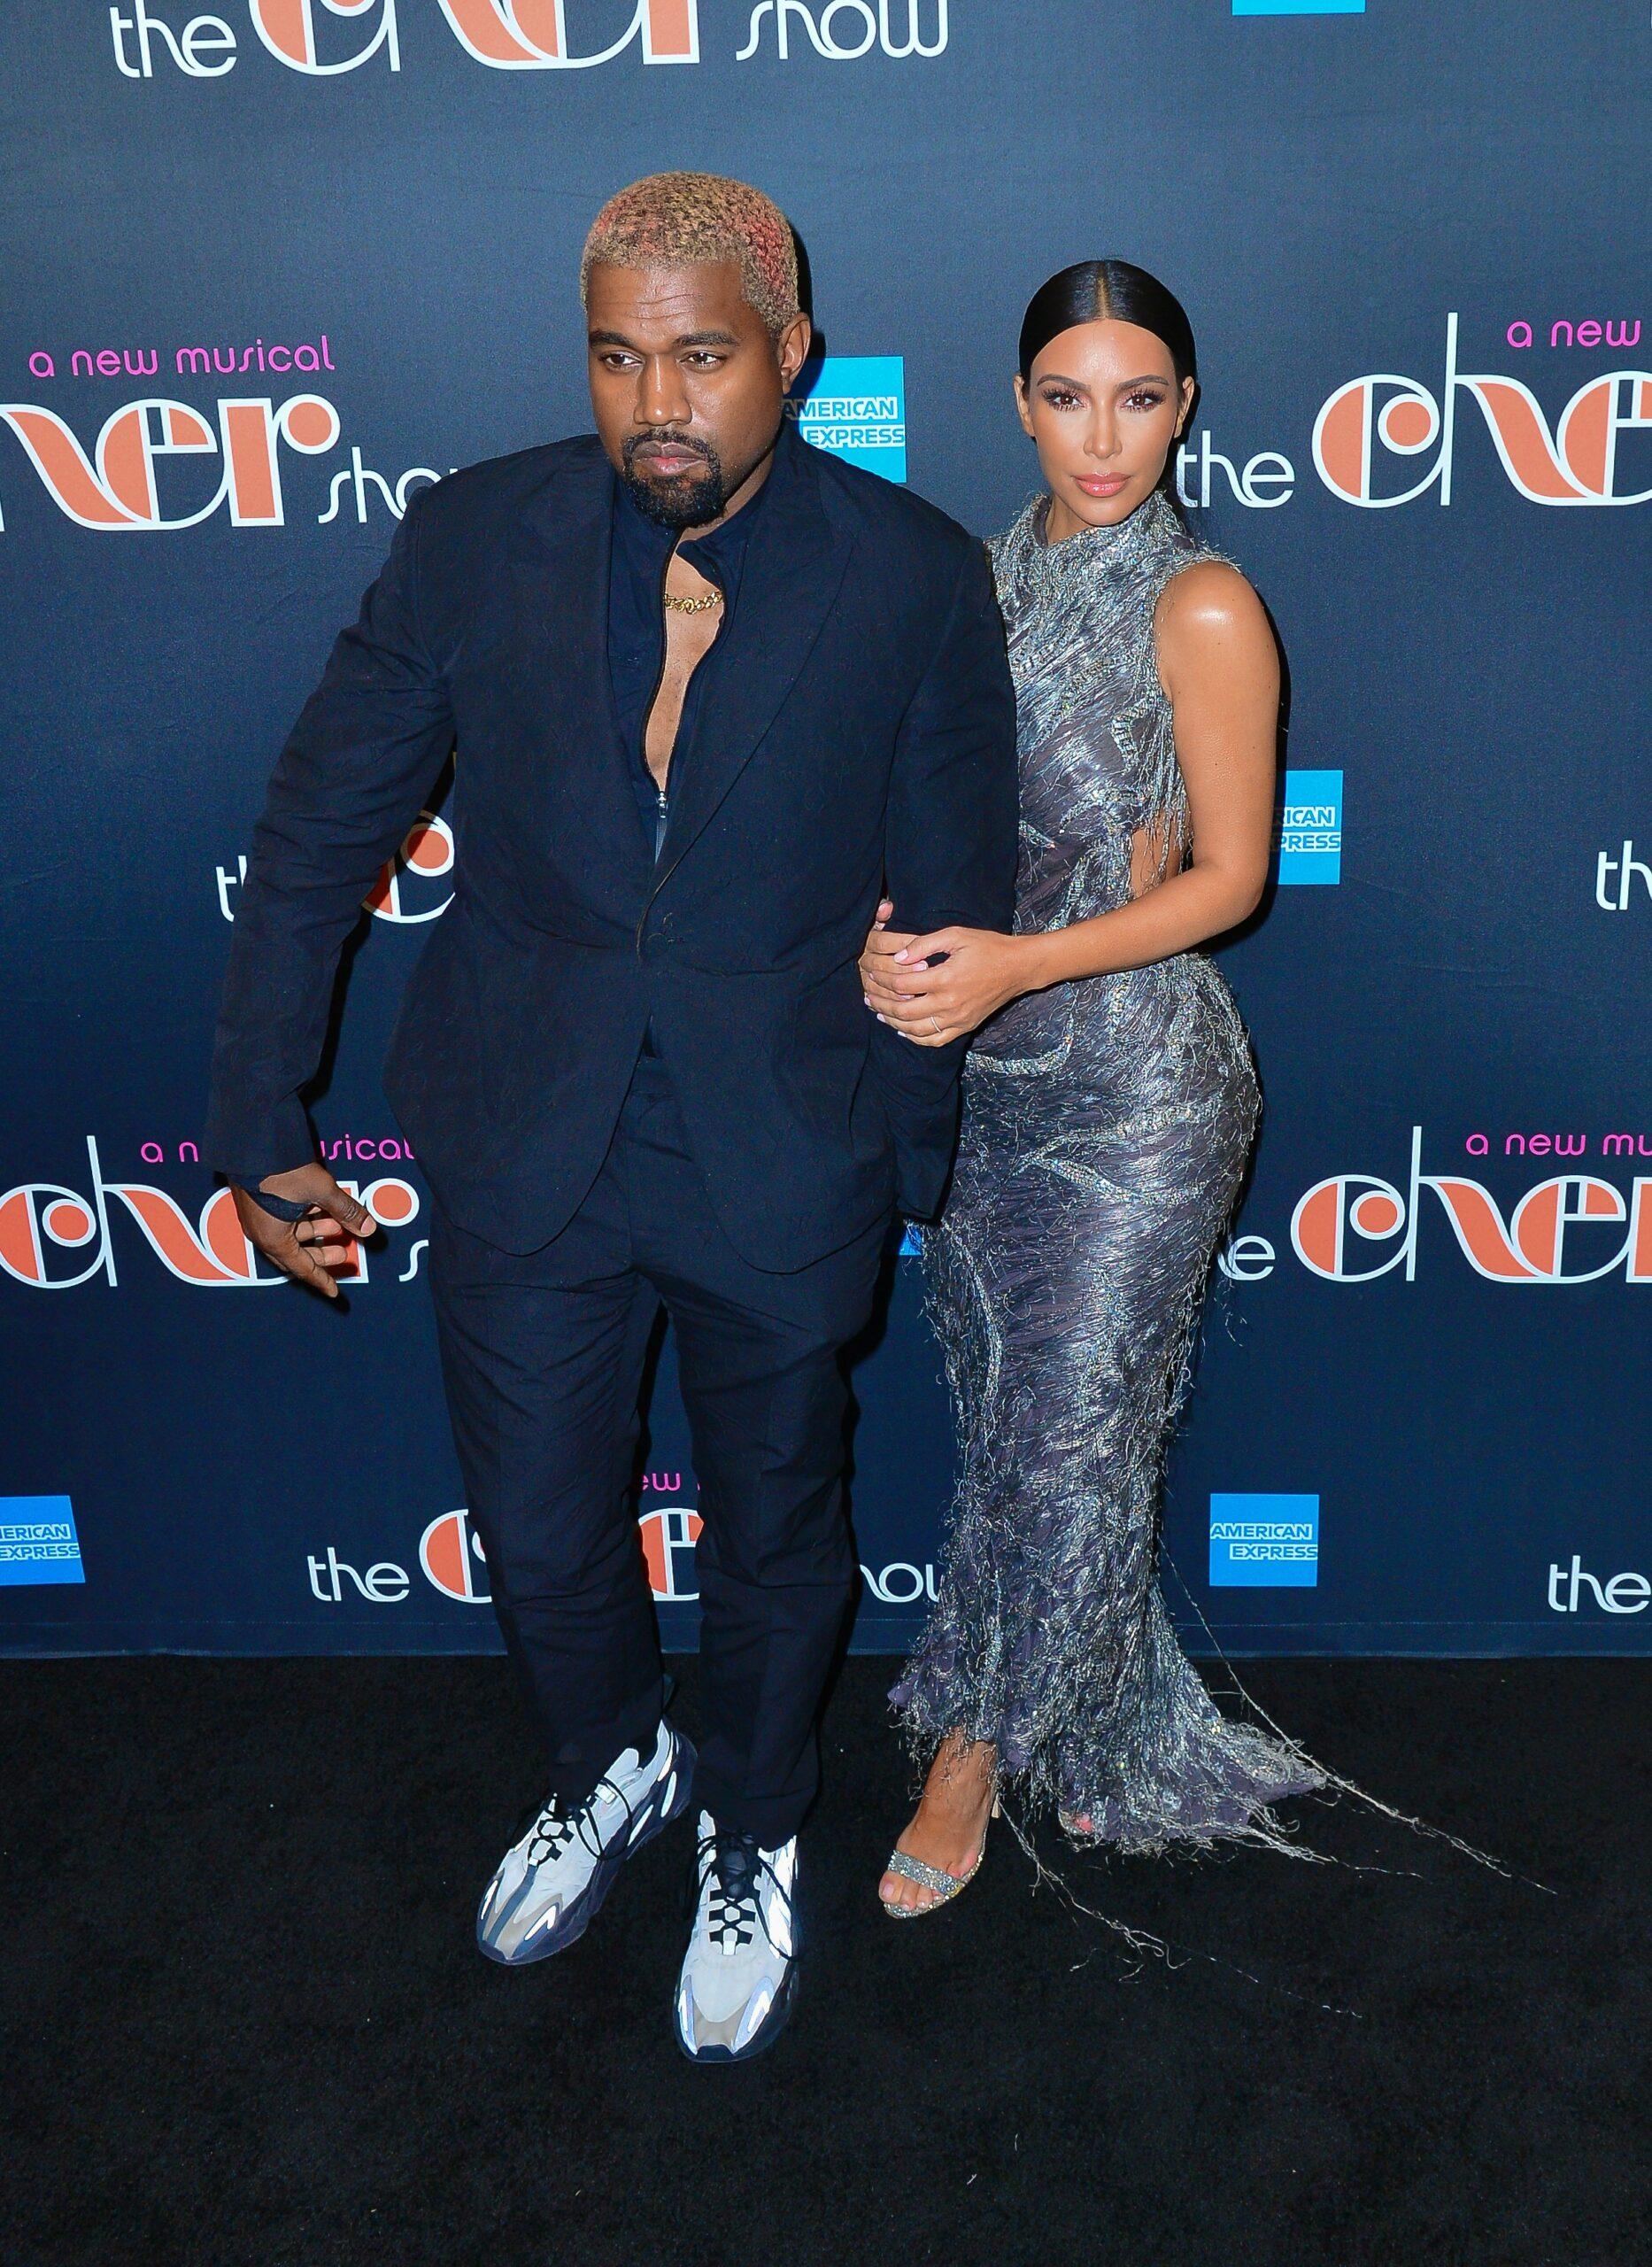 Kim Kardashian and Kanye West hit the red carpet for Cher apos s new musical on Broadway